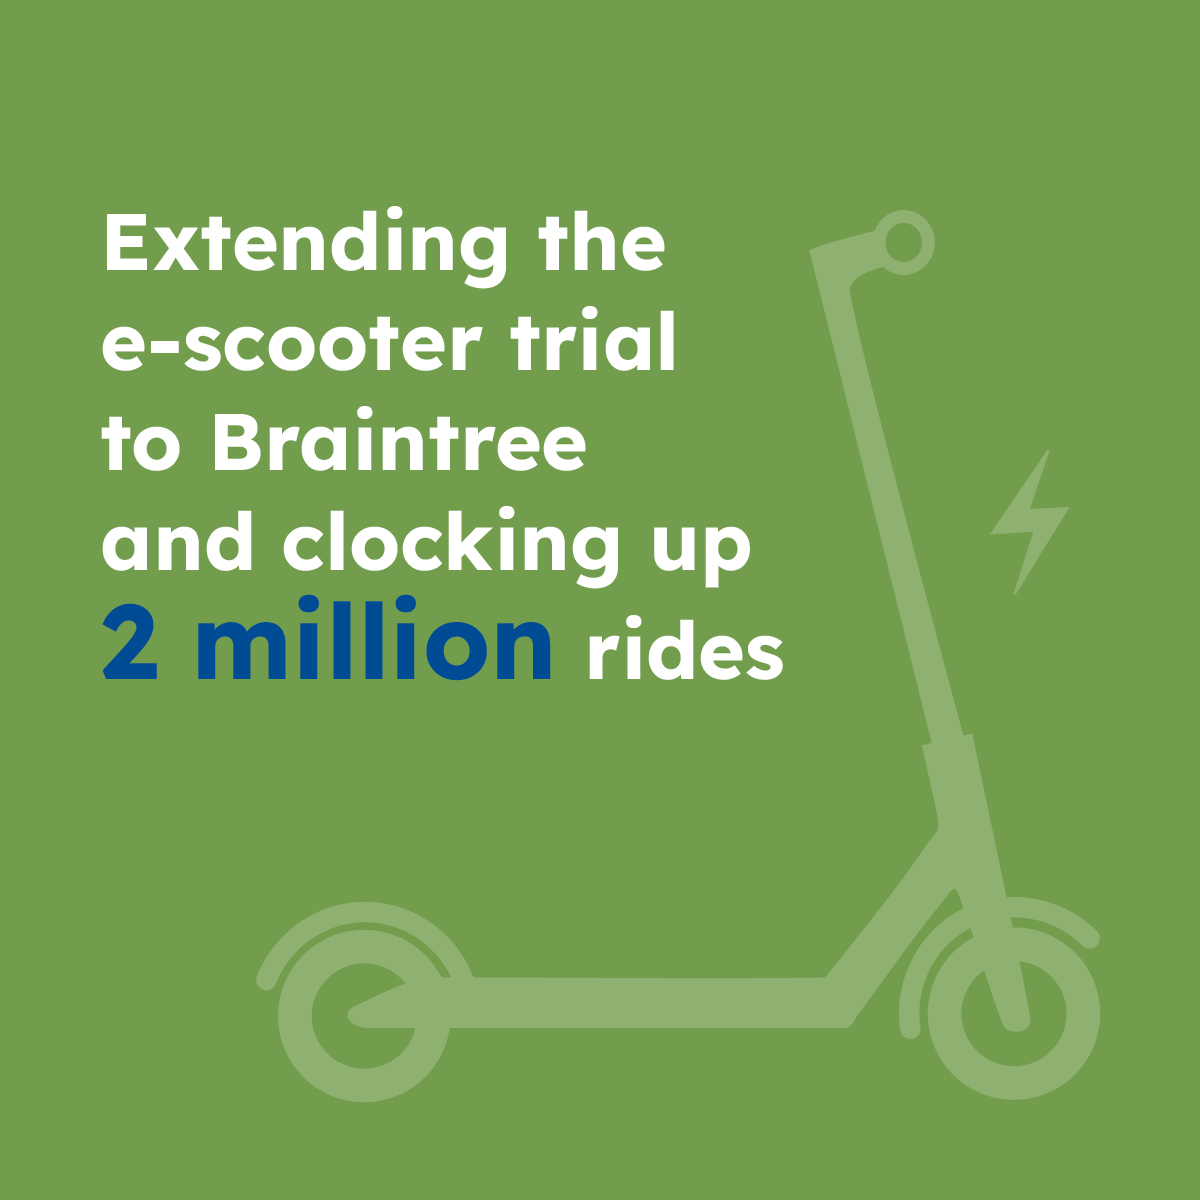 Extending the e-scooter trial to Braintree and clocking up 2 million rides